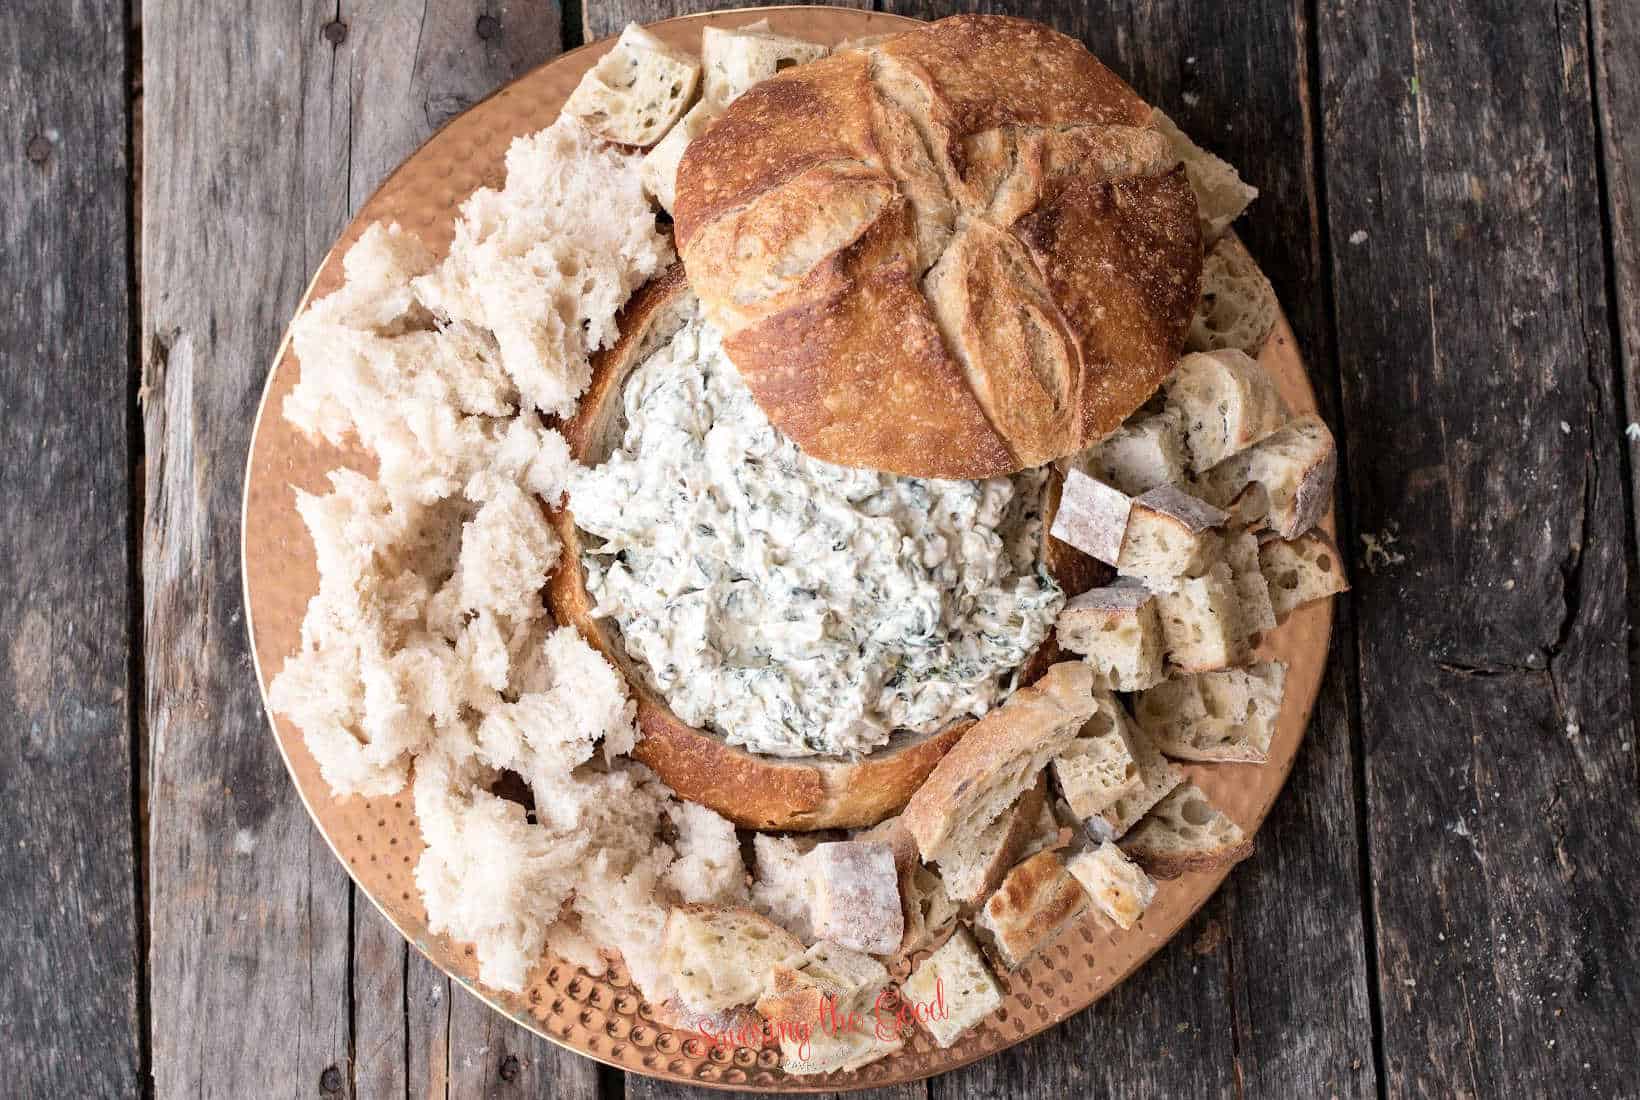 Knorr Spinach Dip in a bread bowl on a copper charger plate.